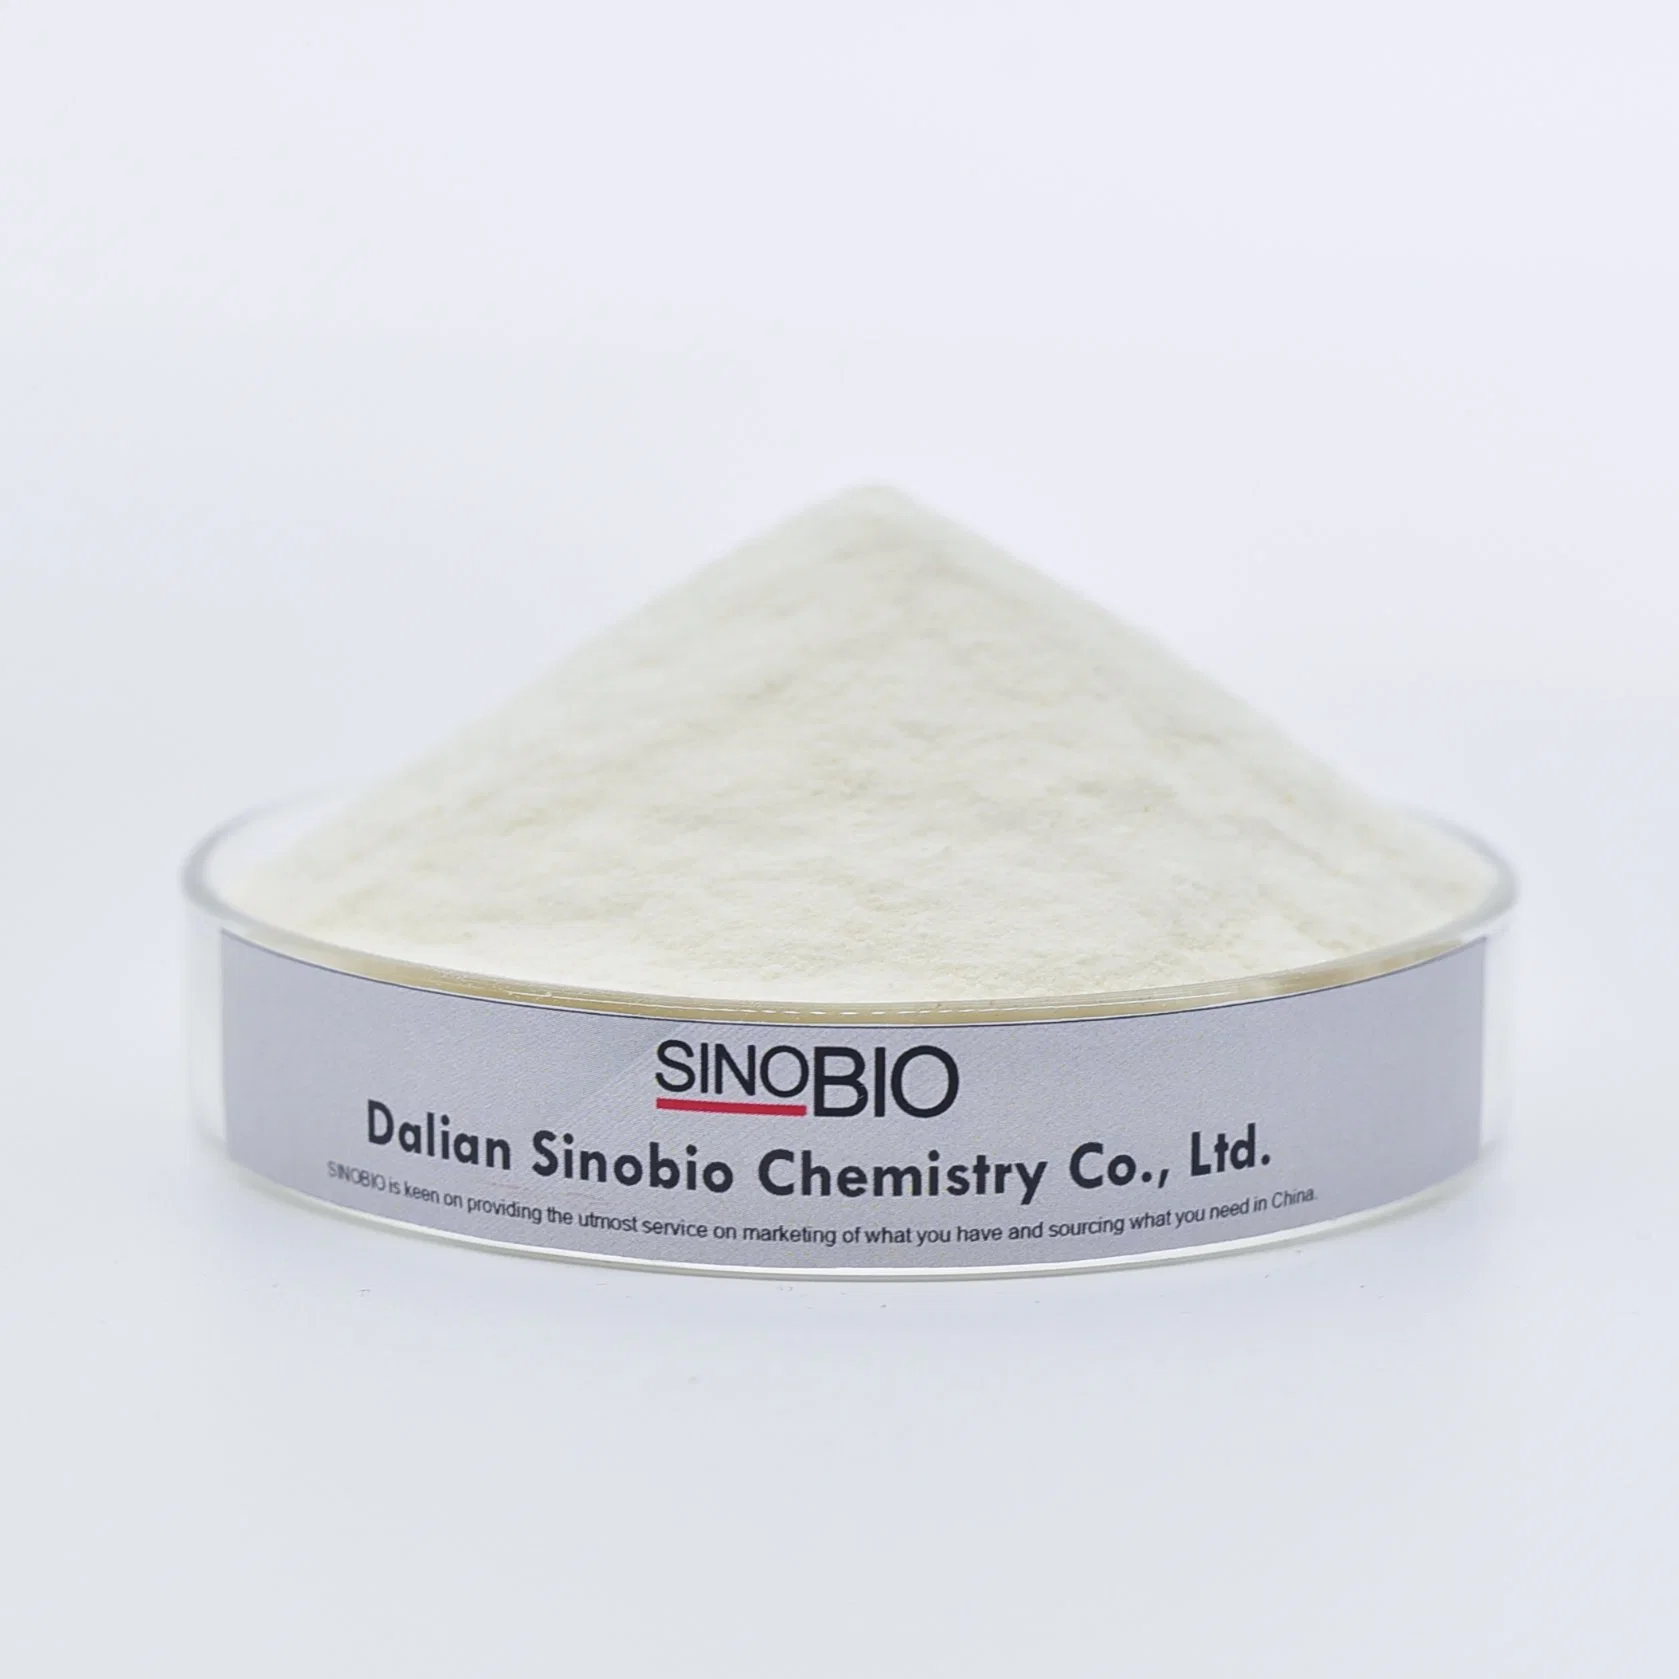 Biocides Cosmetics Raw Material High Purity Iodopropynyl Butylcarbamate Ipbc 99% CAS 55406-53-6